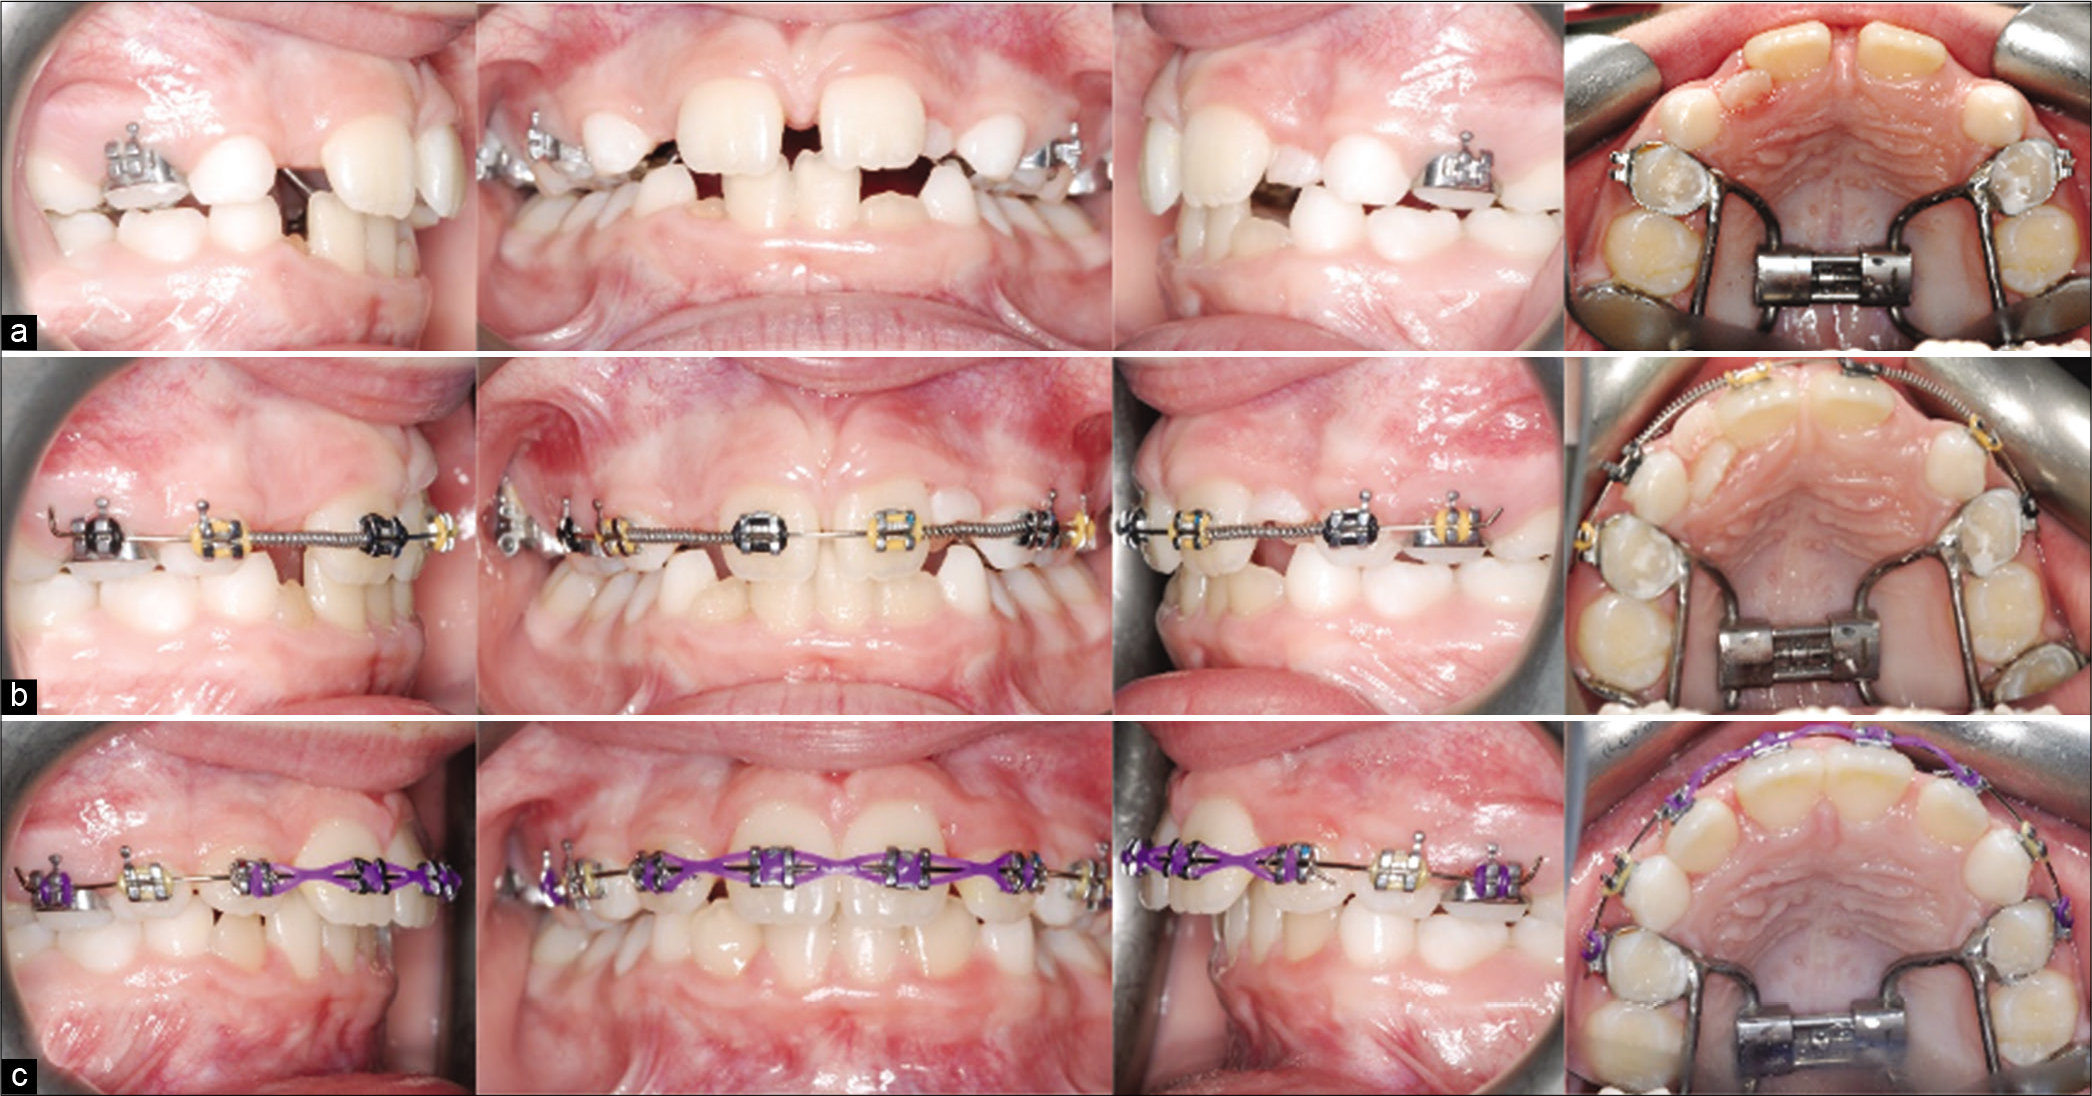 Case 1 (a) progress treatment photographs after maxillary expansion. (b) Progress treatment photographs showing the use of coiled springs to close diastema. (c) Progress photographs of alignment of maxillary incisors.